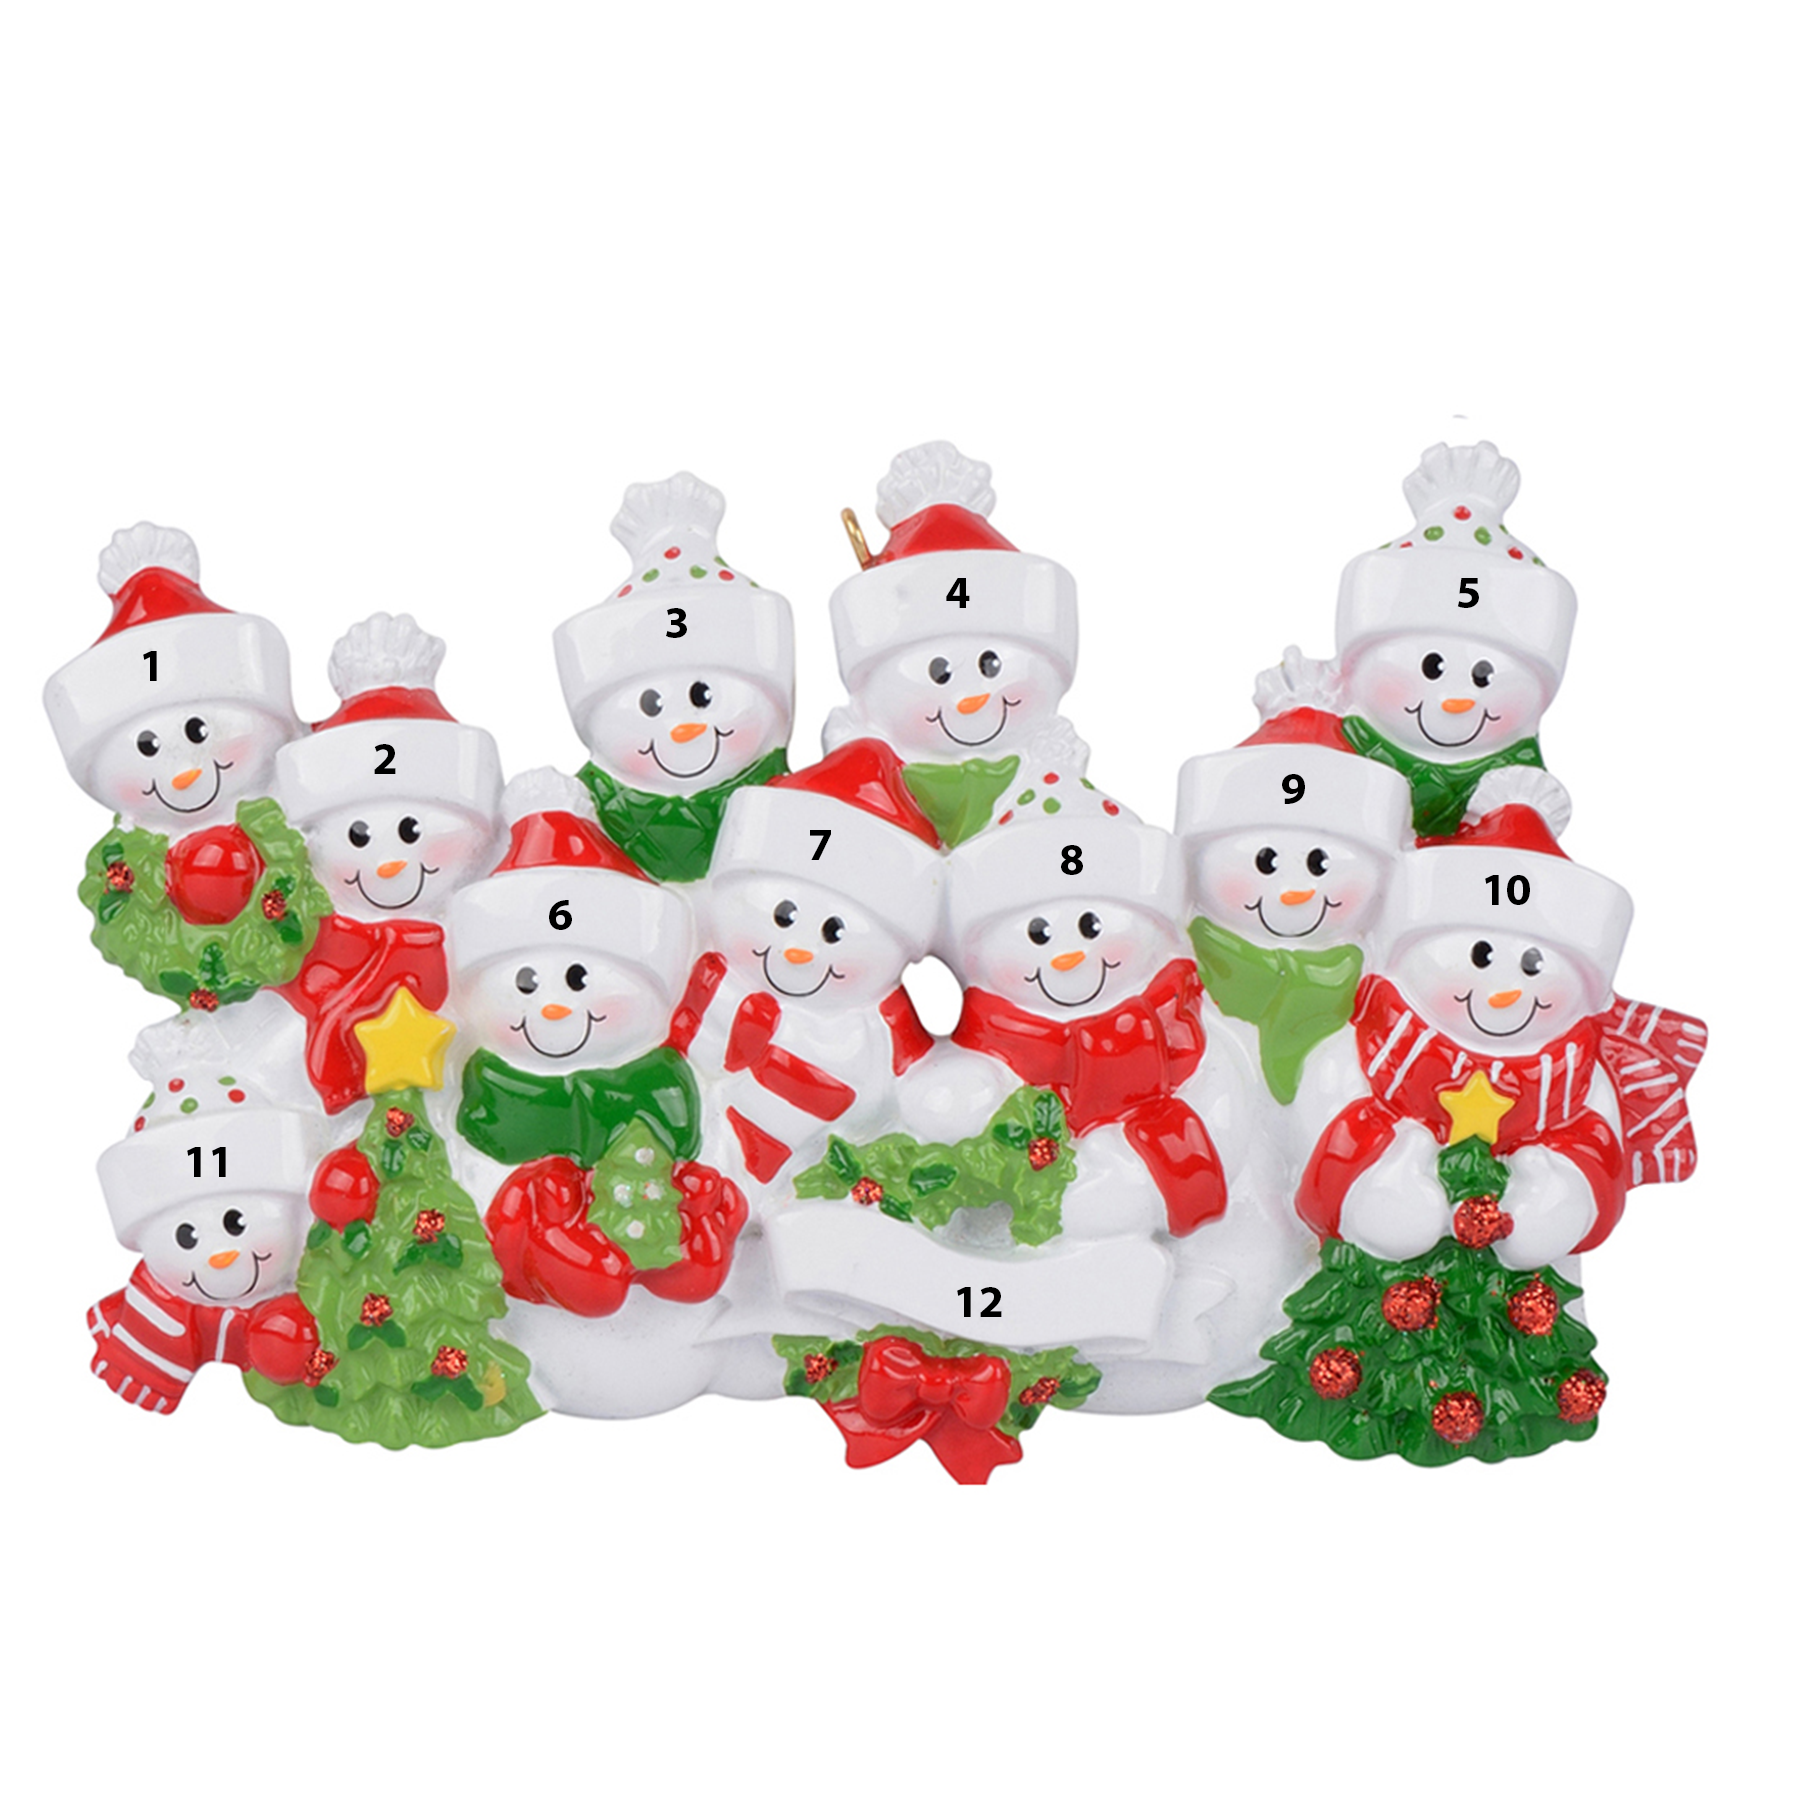 Snowman Family of Eleven